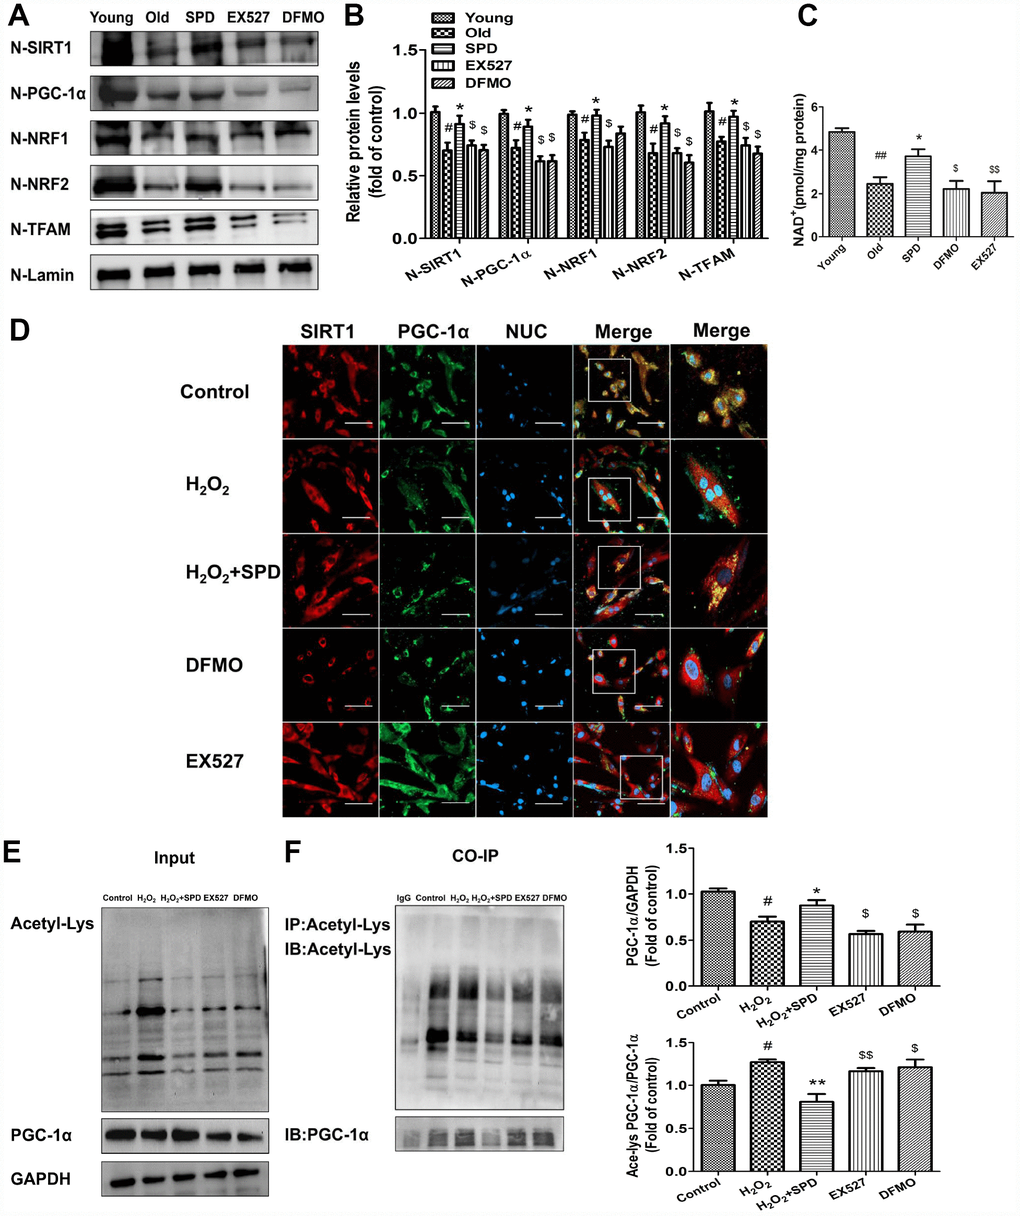 SIRT1 is required for SPD-induced PGC-1α activation in aging cardiomyocytes. (A) Western blot detection of SIRT1, PGC-1α, NRF1, NRF2, and TFAM in nuclear fractions isolated from cardiac tissue. (B) Quantification of protein expression based on L-lamin as a nuclear loading control (n = 4). (C) Quantification of NAD+ levels by fluorimetry (n = 8). # P ## P * P ** P $ P $$ P D) Co-localization of SIRT1 (red) and PGC-1α (green) by immunofluorescence in H9C2 cells. Nuclei were stained with DAPI (blue) (n = 8); scale bars: 20 μm. (E, F) Western blot and immunoprecipitation (IP) analysis of PGC-1α acetylation status in NRCMs. Quantification is shown on the right-hand side of the graphs. GAPDH was used as loading control (n = 4). # P ## P * P 2O2, ** P 2O2, $ P 2O2 + SPD, $$ P 2O2 + SPD.